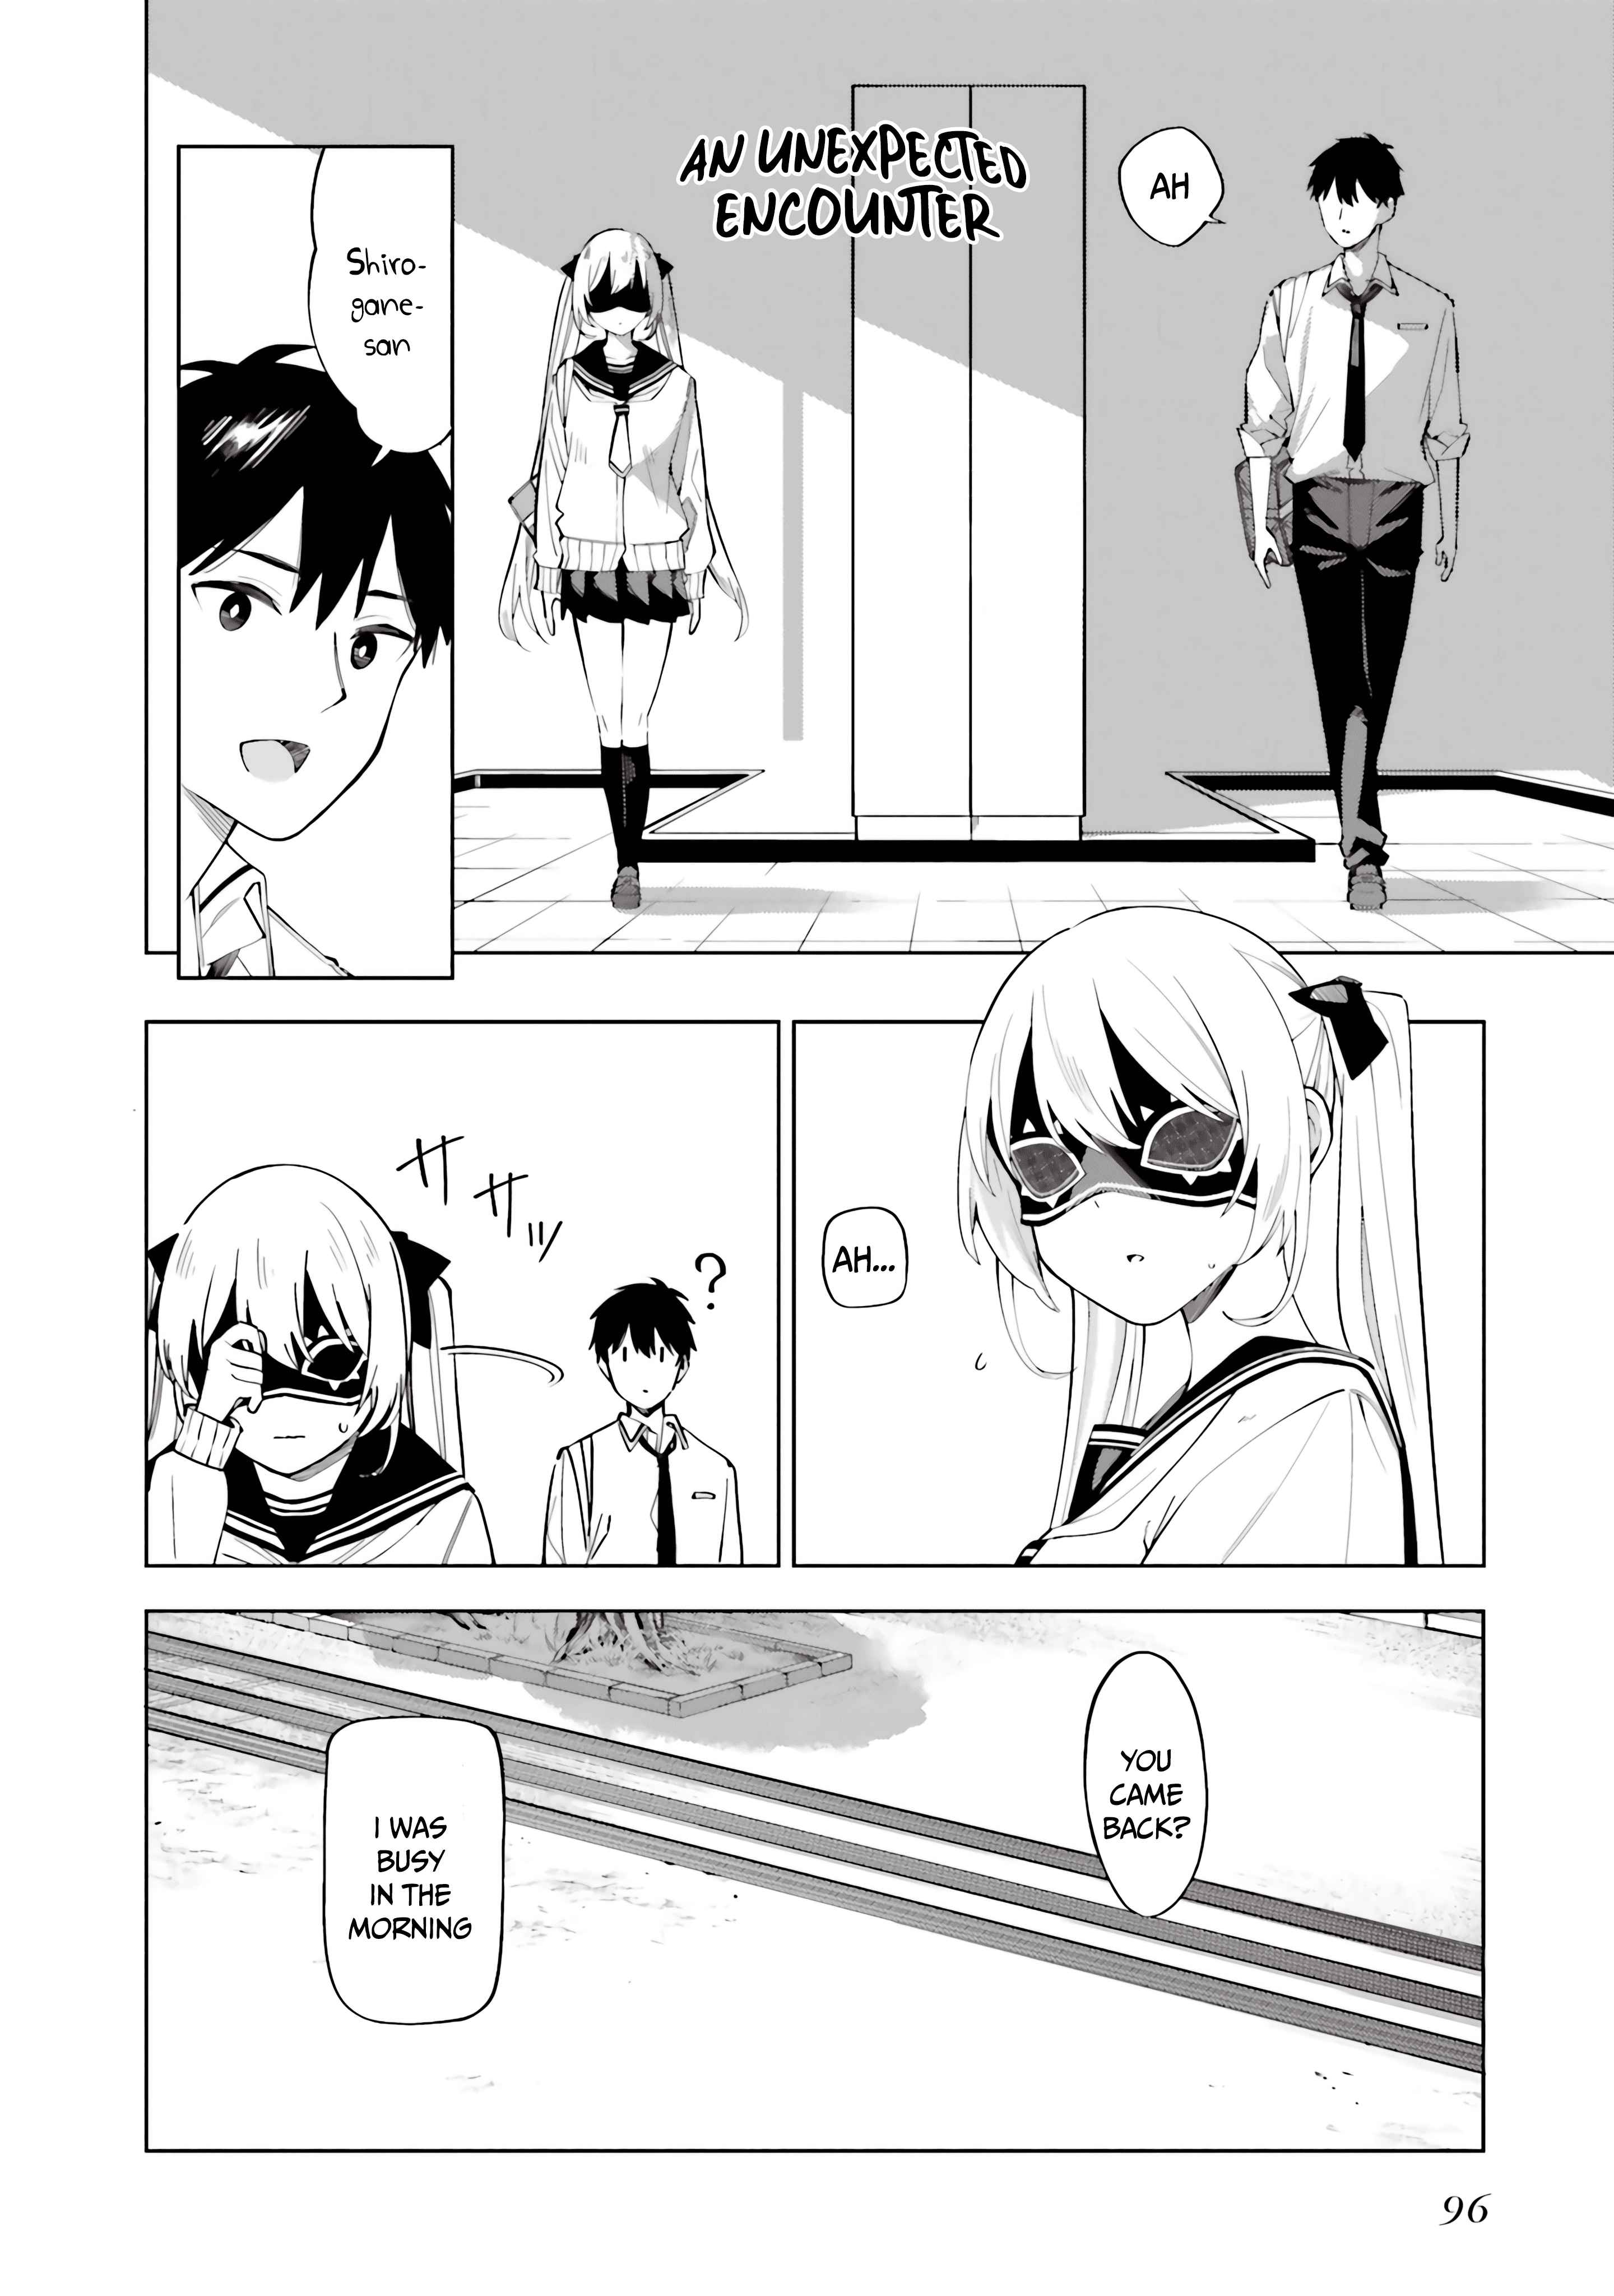 I Don't Understand Shirogane-san's Facial Expression at All Chapter 16-eng-li - Page 4